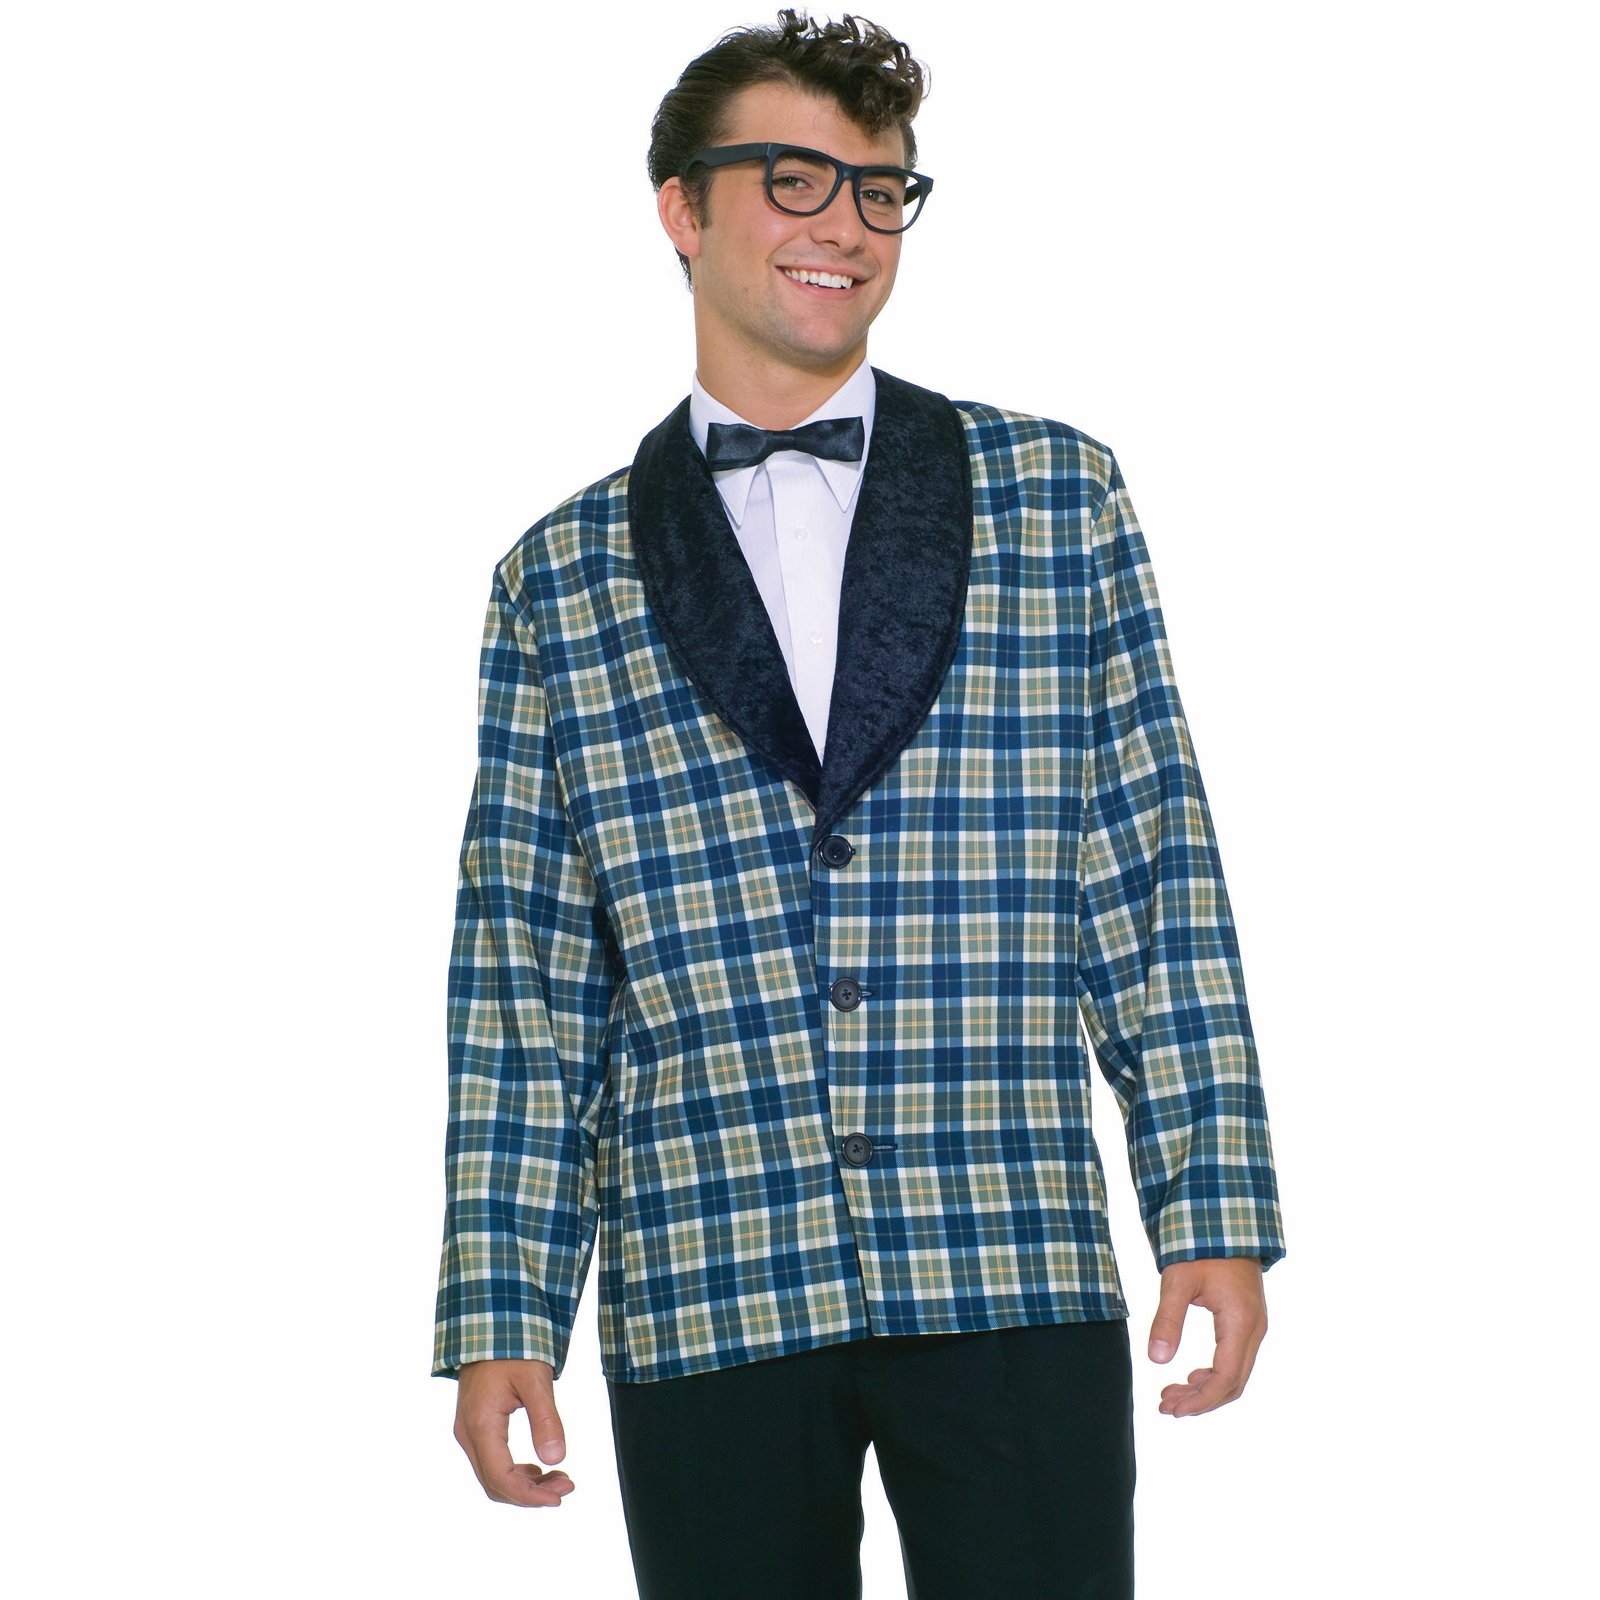 Good Buddy Adult Costume - Click Image to Close